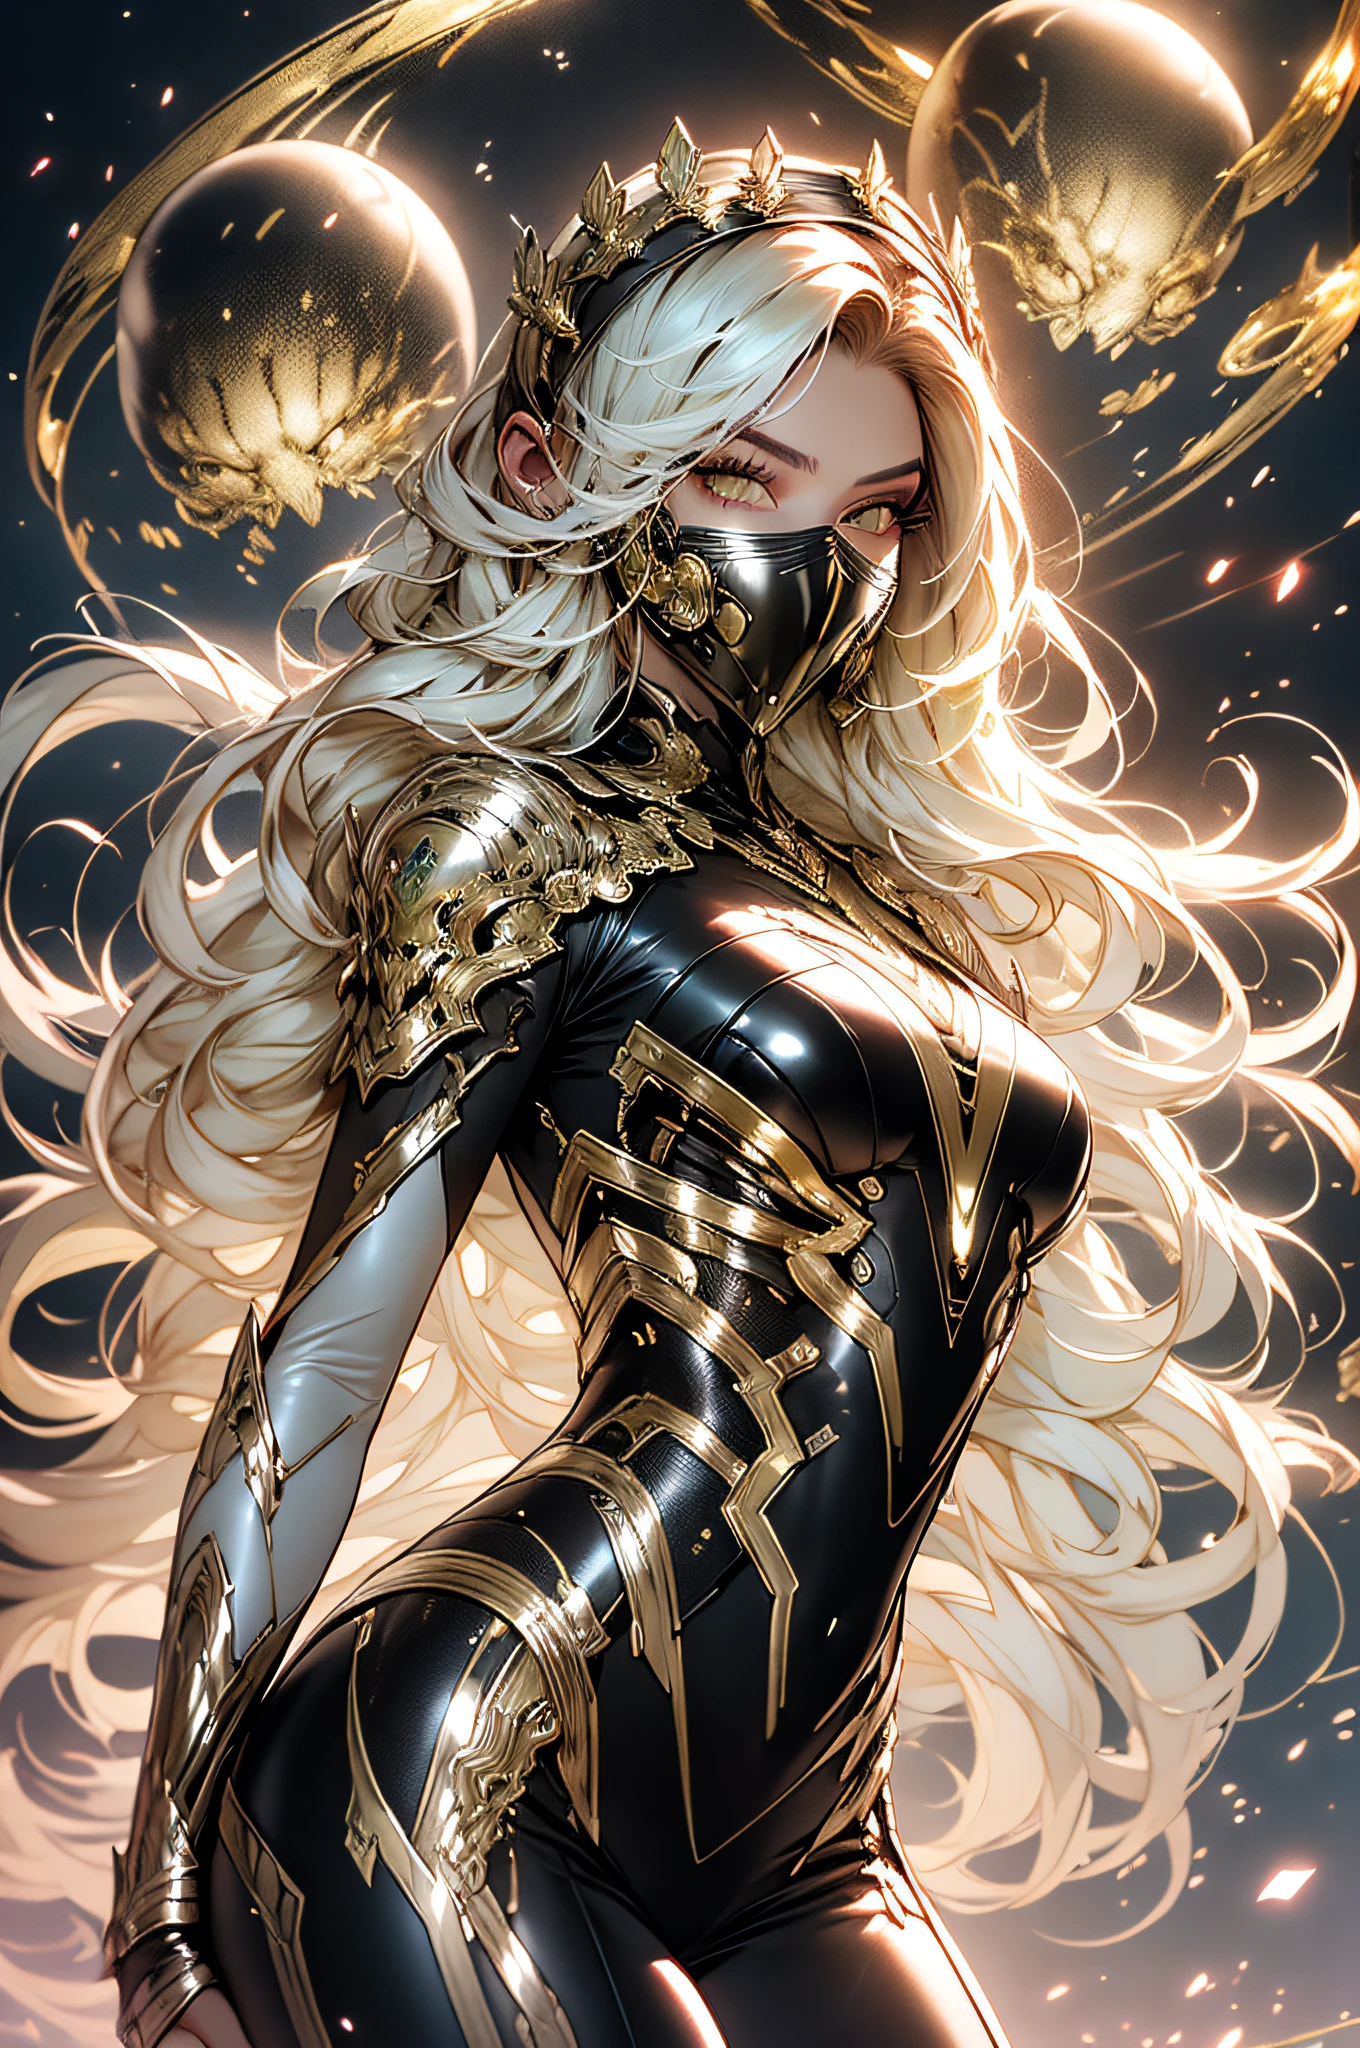 Woman in a golden transparent dress,high-heels, (((Breasts huge, cleavage large))),Waist slender,(umbigo baring,bare waist), long  hair, ultra-detailed details,Zhenyi Station top of the range, Storm location, detailed fantasy art, stunning character art, Beautiful and exquisite character art, Beautiful gold and silver armor, extremely detaild,  in shining armor, Tiaras and exquisite jewelry,crystal jewelry filigree, full body capture, milky ways, stunning visuals, (dynamic streaks, light trails:1.2), swirly vibrant colors,